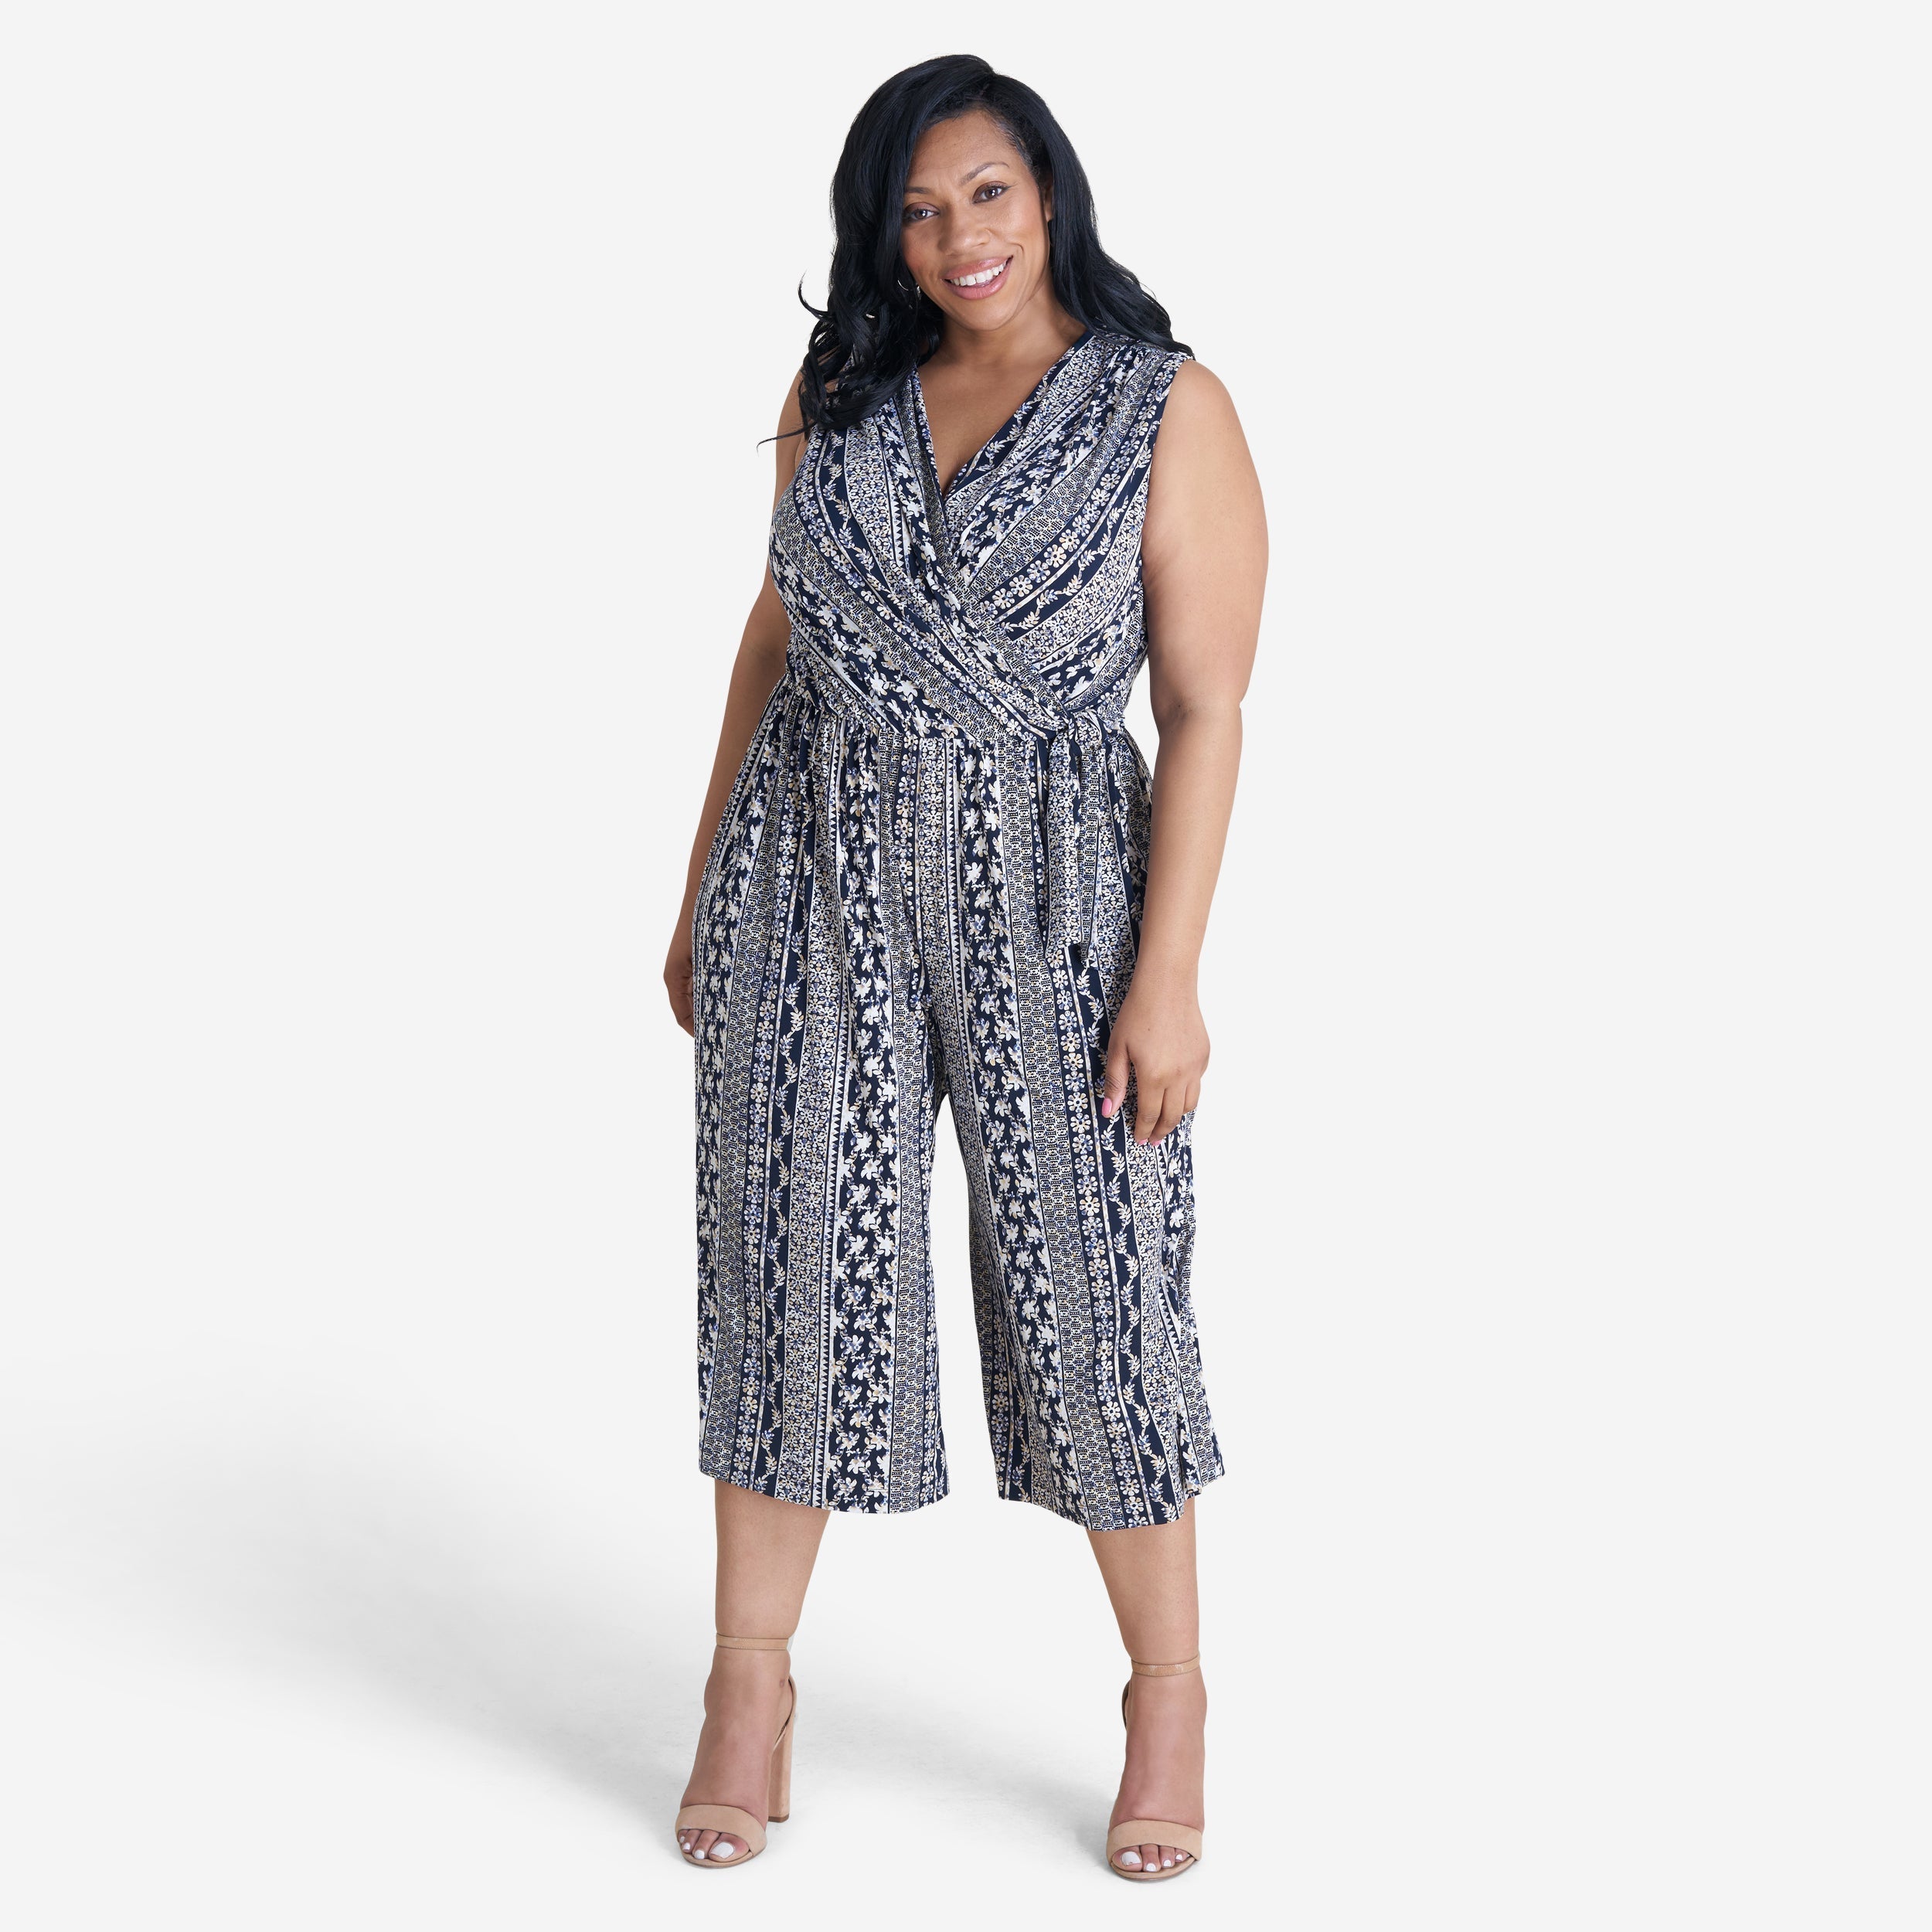 Woman posing wearing Navy/Maize Morgan Cropped Jumpsuit from Connected Apparel